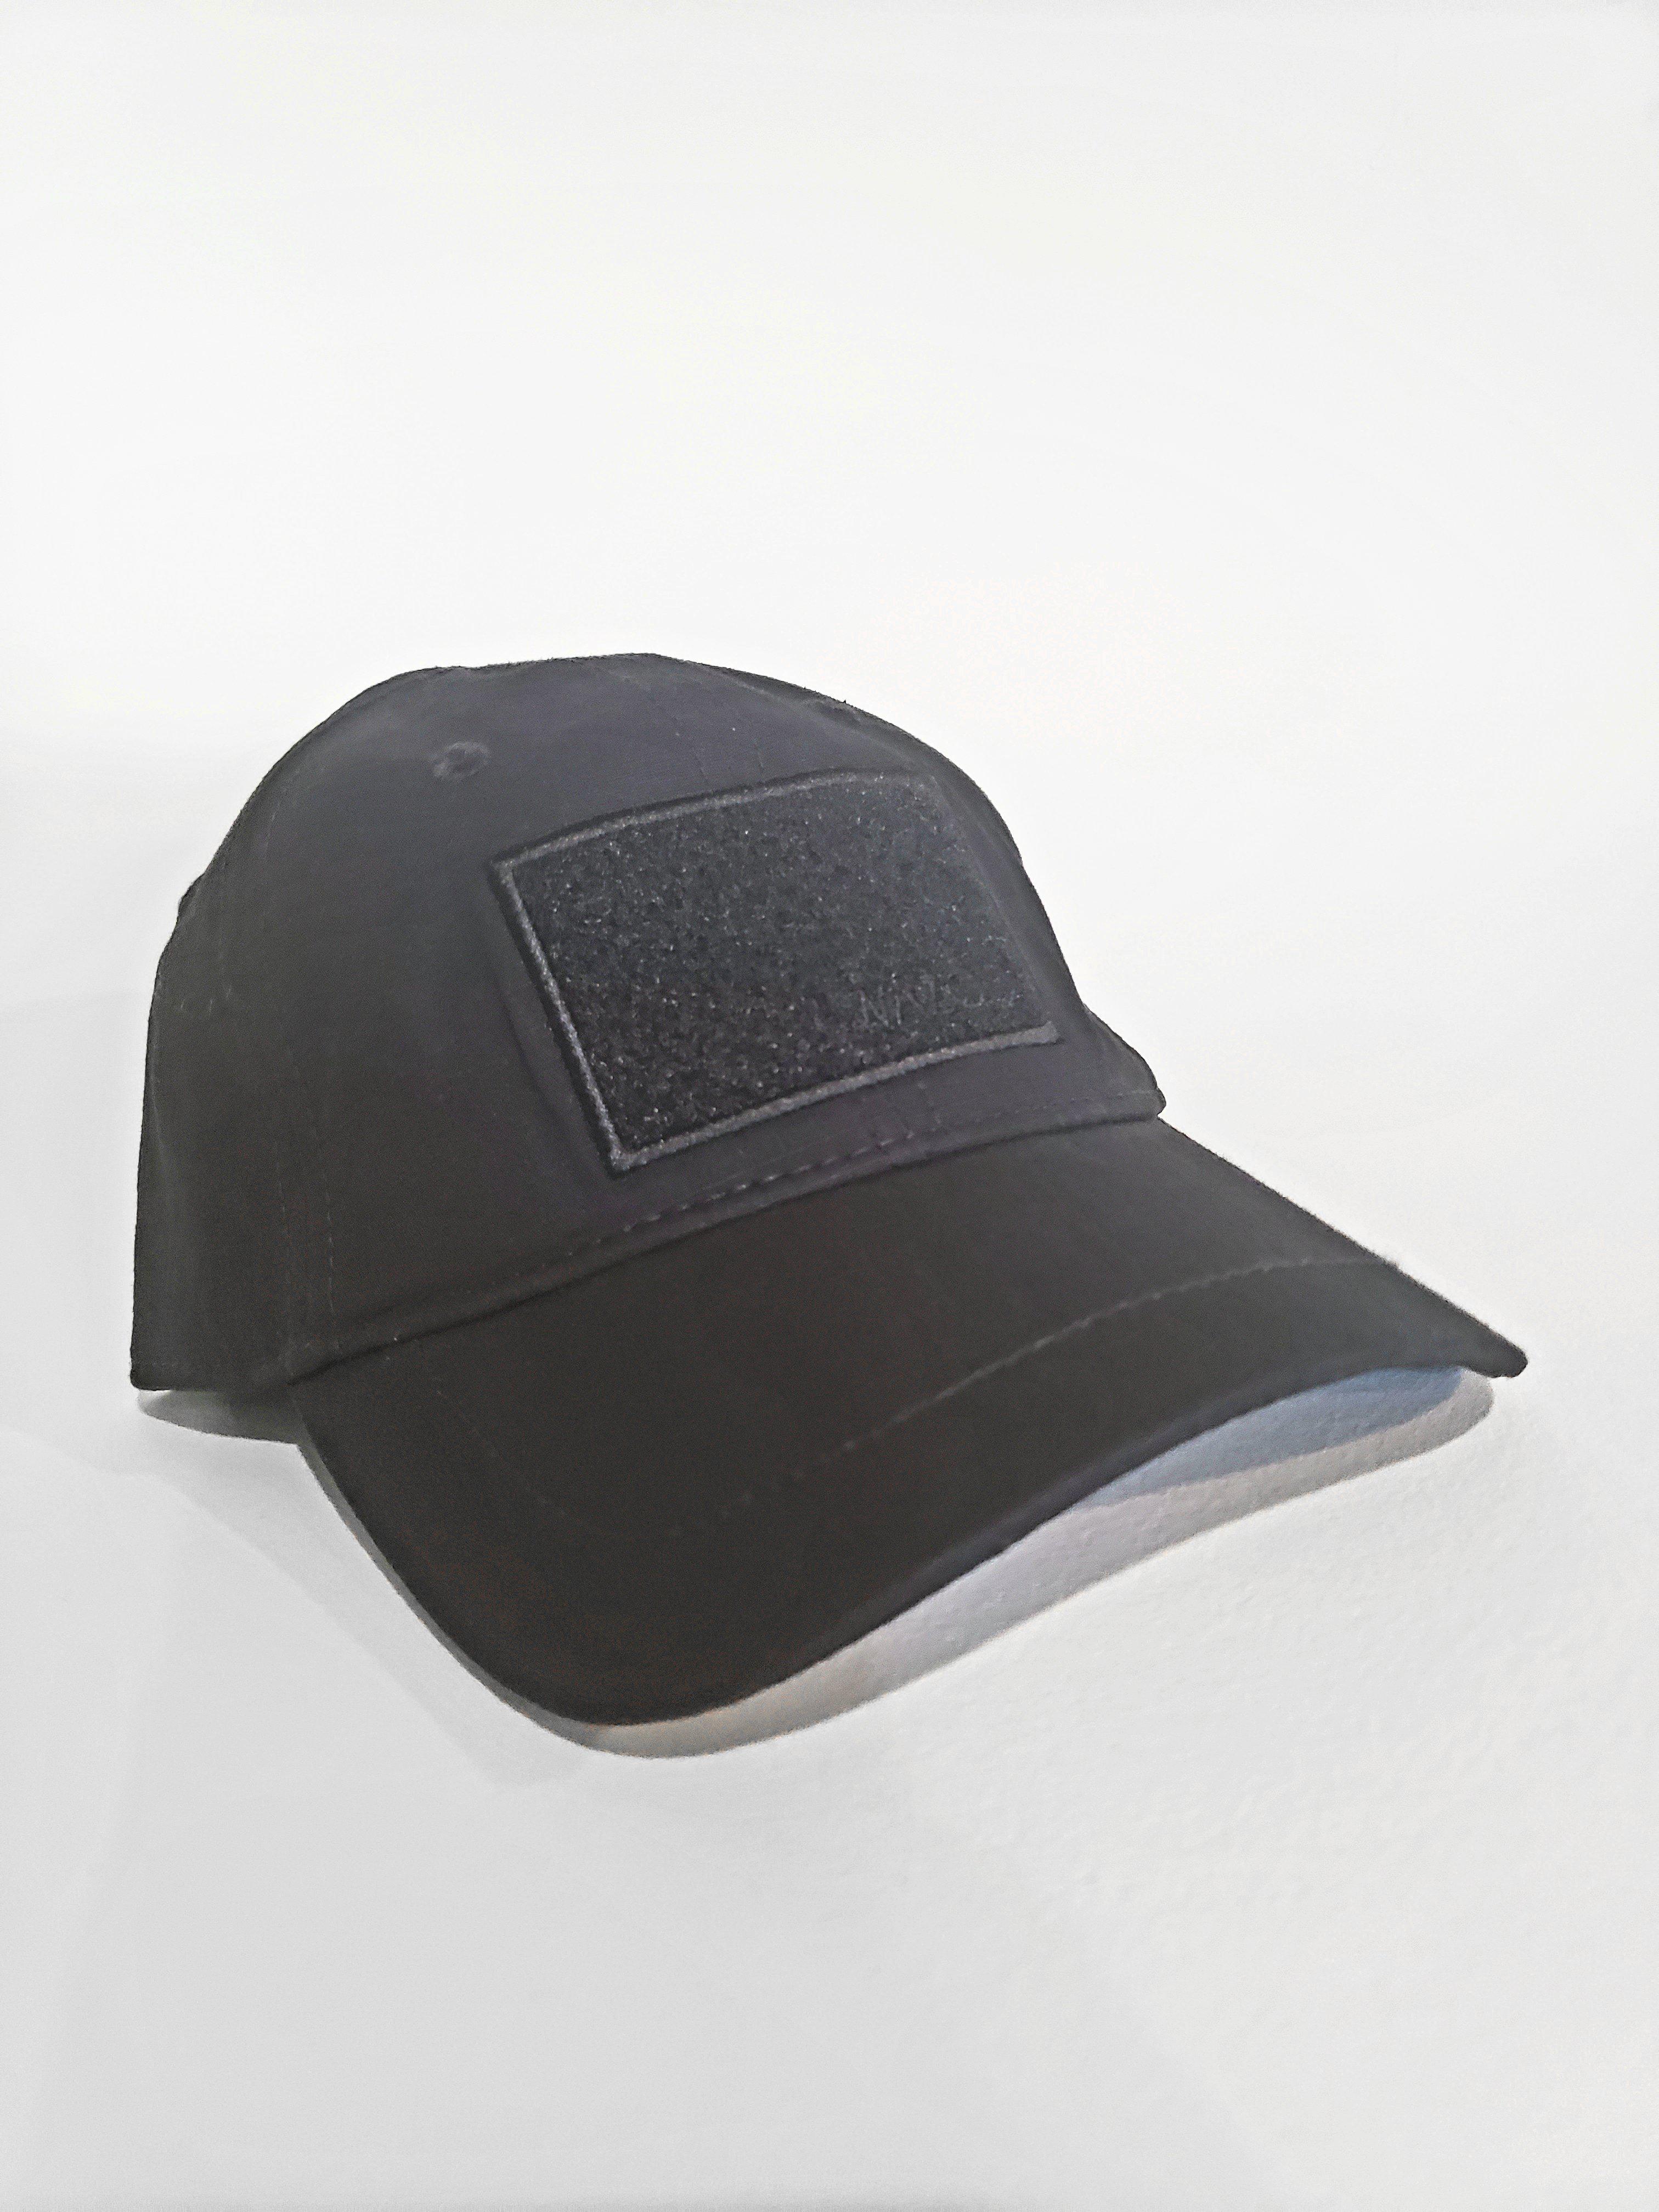 Folding Cap with 4 Secret Pockets for Cash and Keys at